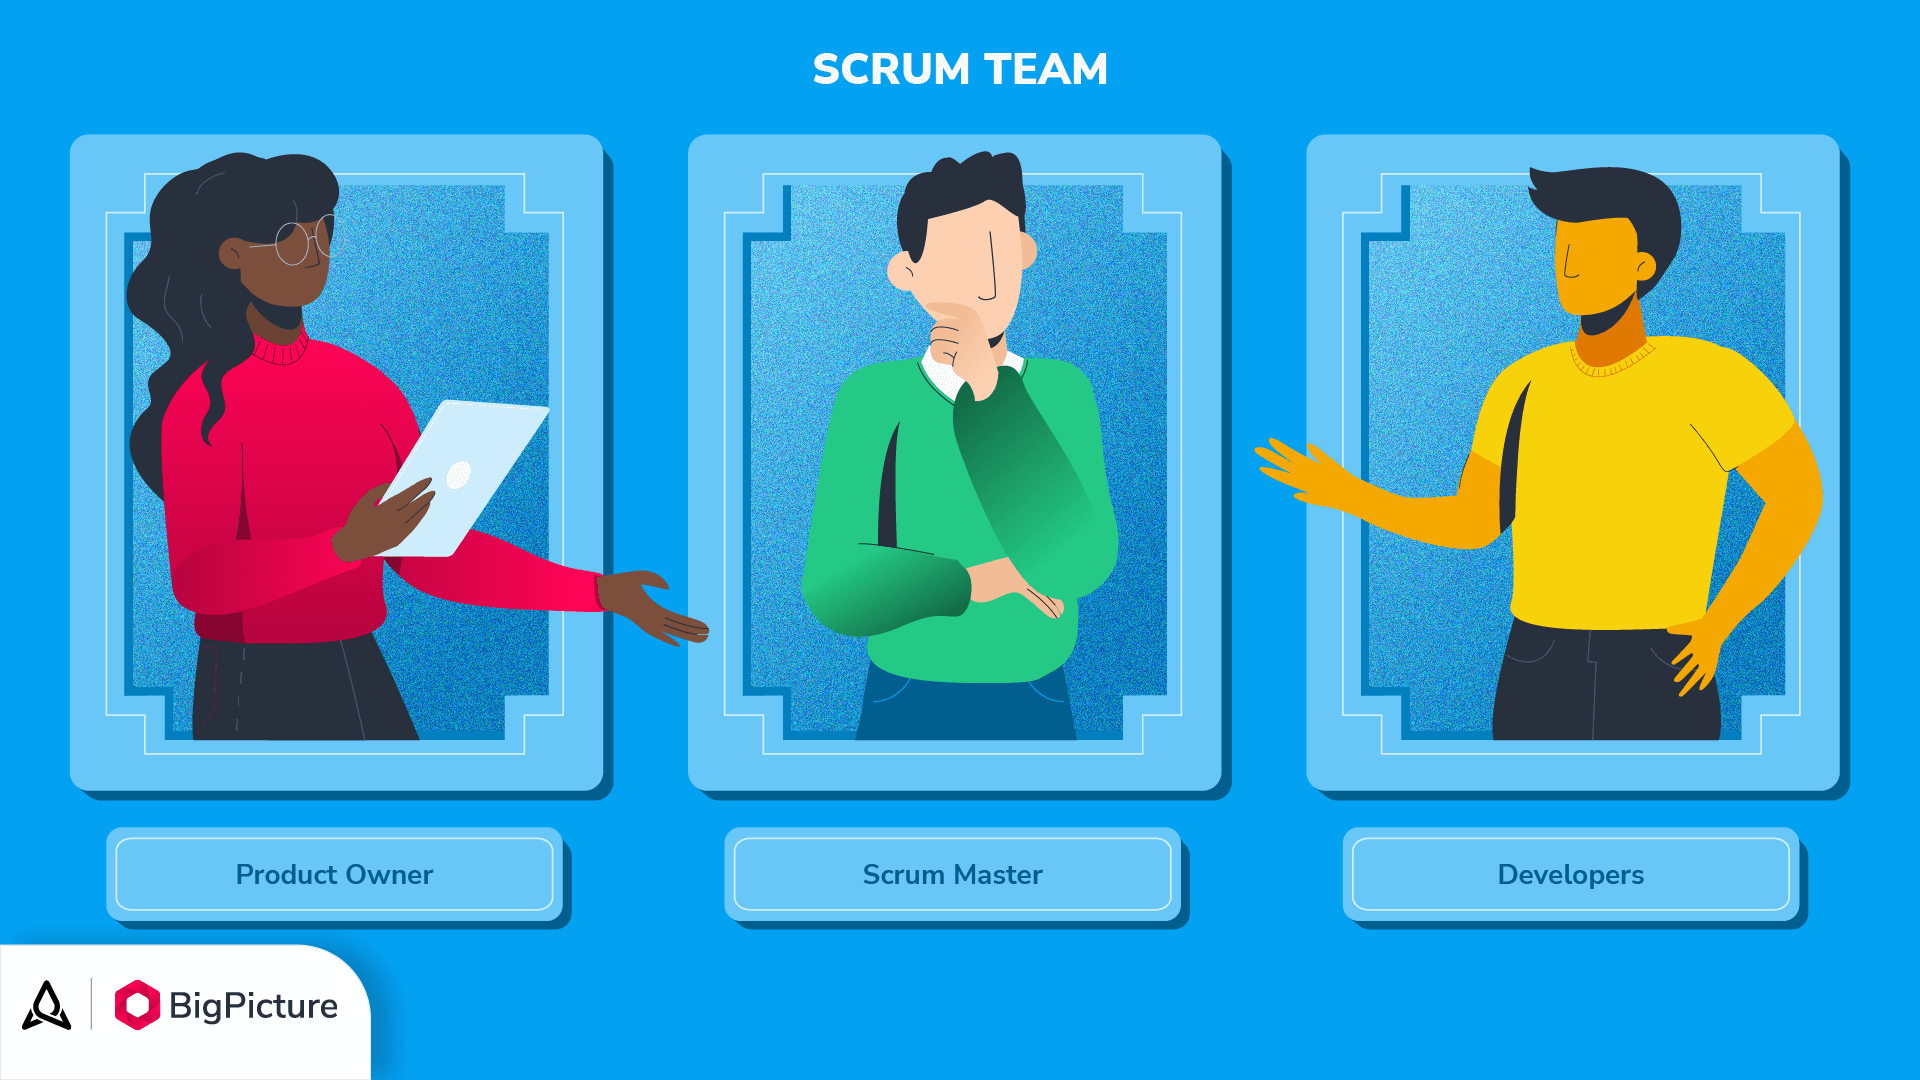 Three characters representing each of the Scrum roles: the Product Owner, the Scrum Master, and the Developers